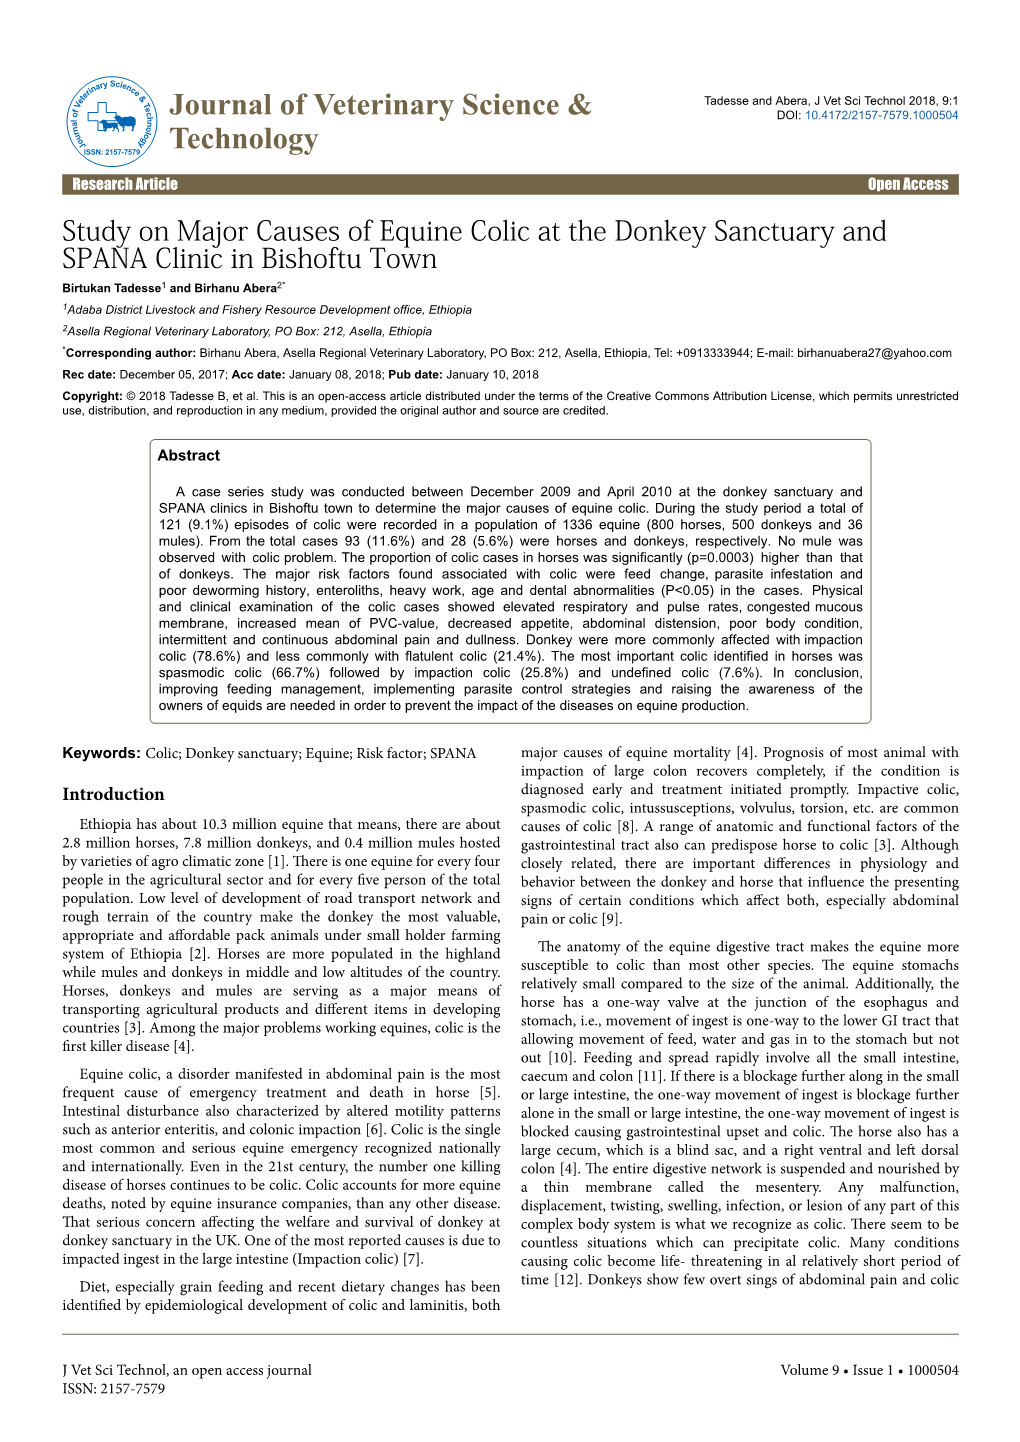 Study on Major Causes of Equine Colic at the Donkey Sanctuary And